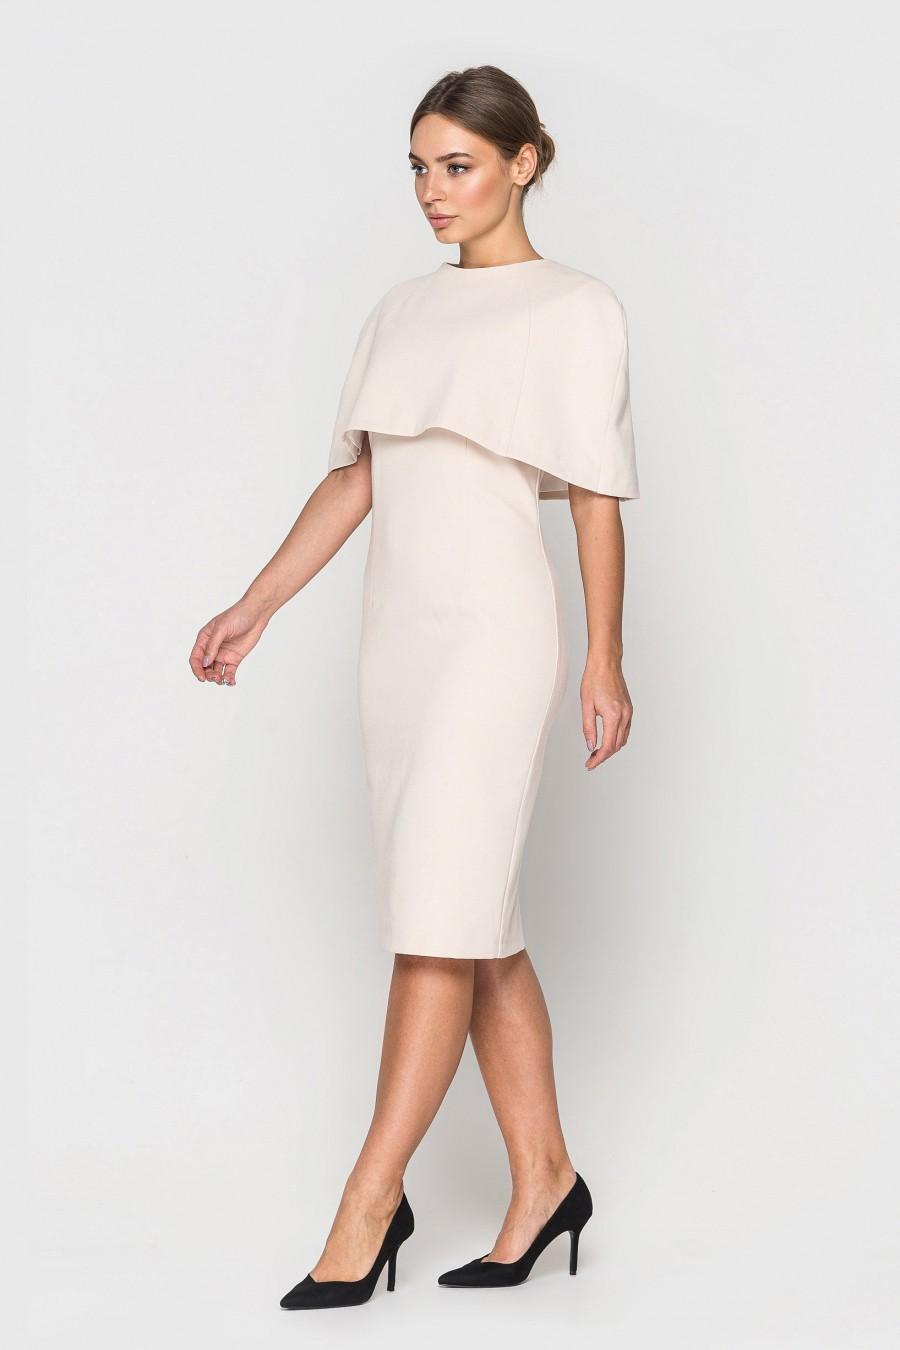 Wedding - Cape dress "MEGAN style" in vanilla beige, classic shift dress with a cape for wedding or business